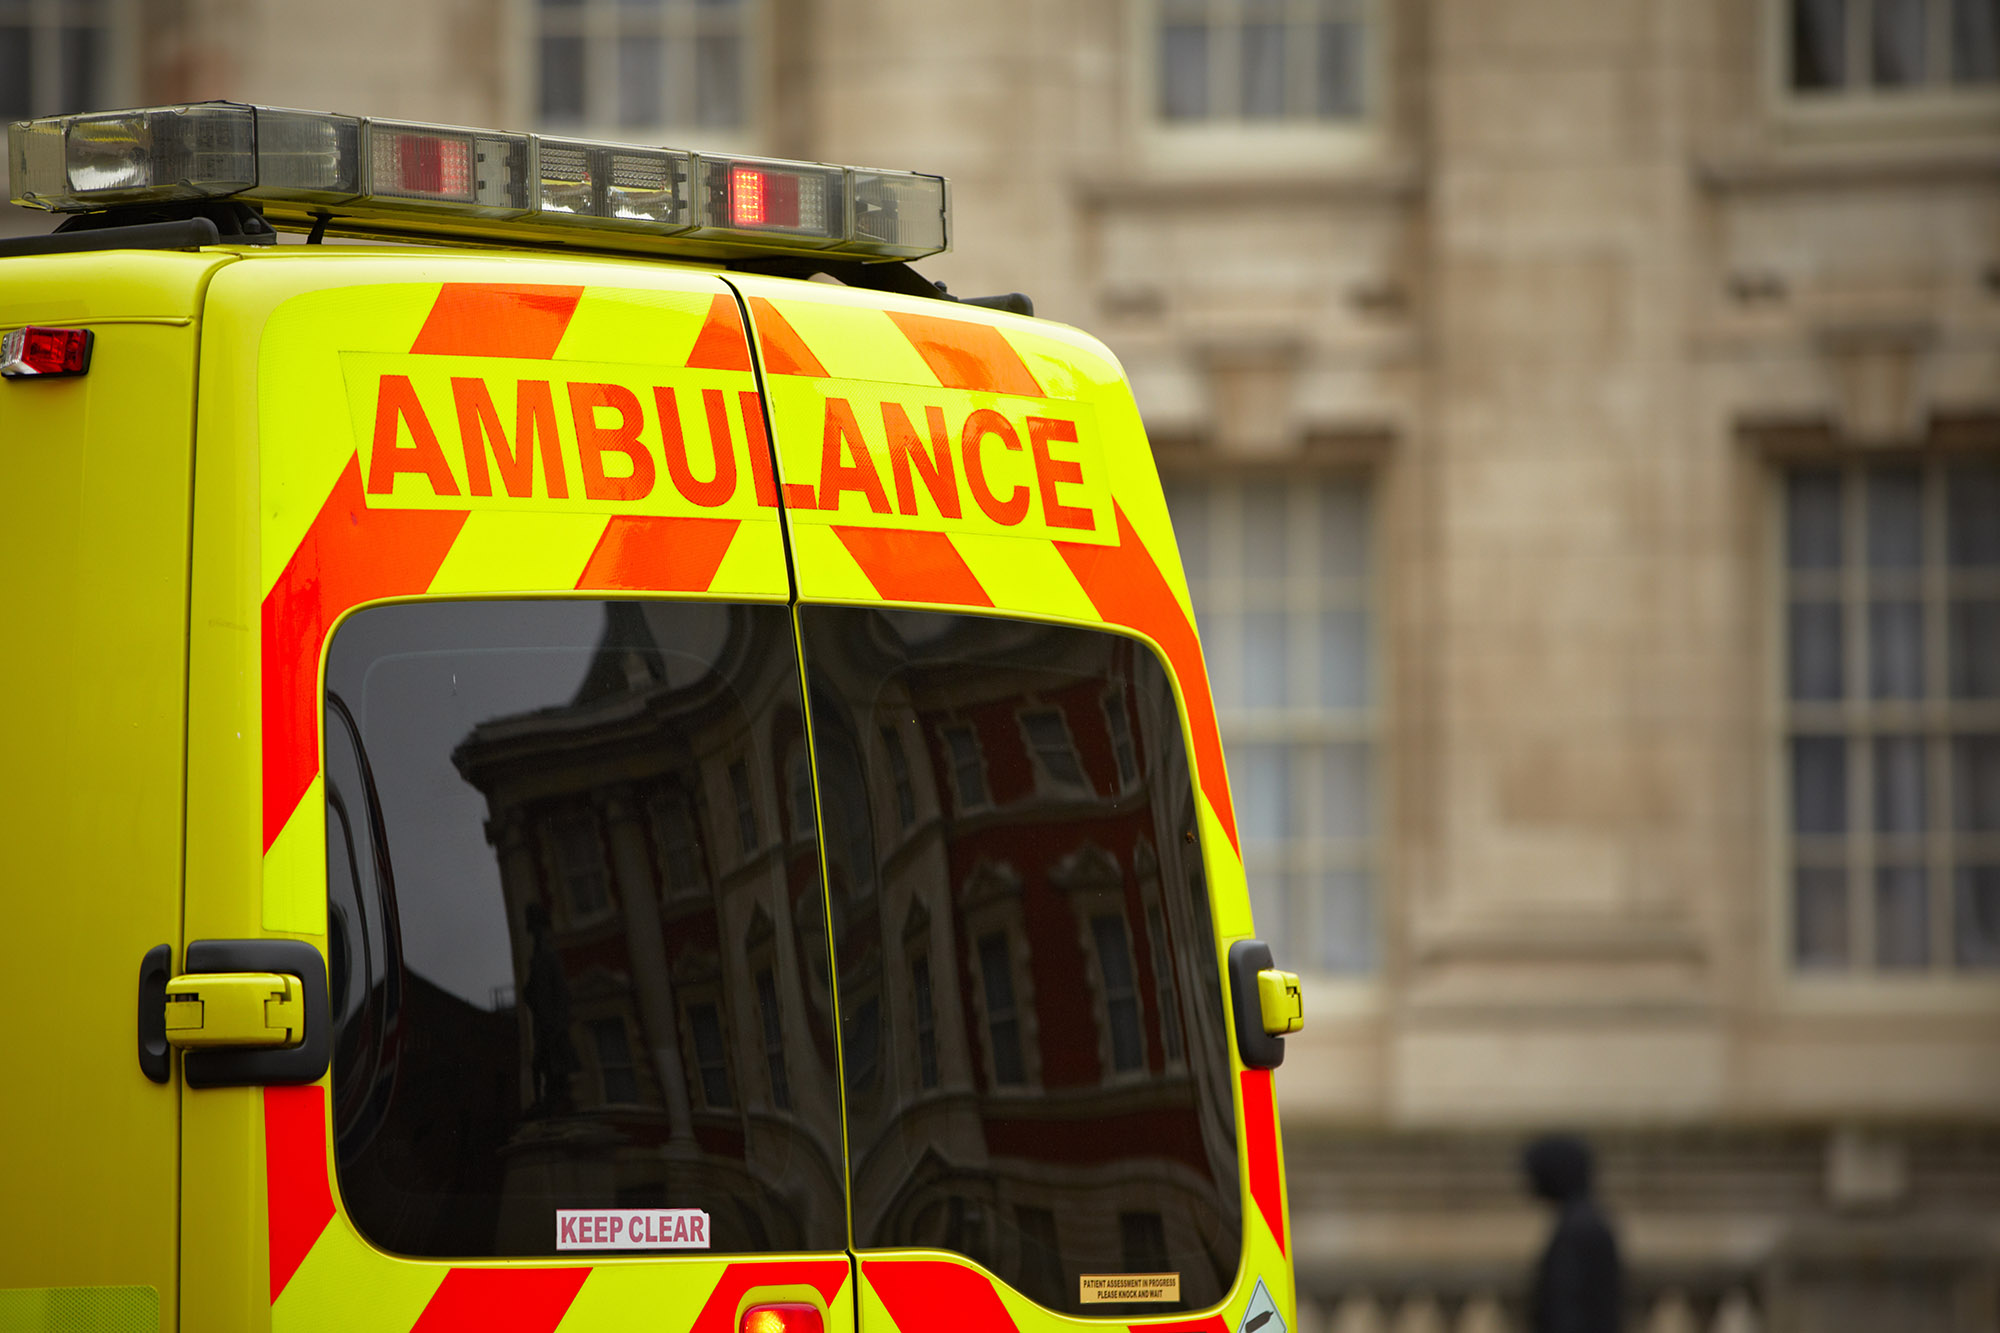 Ambulance, personal injury solicitors, accident claim managers Sheffield